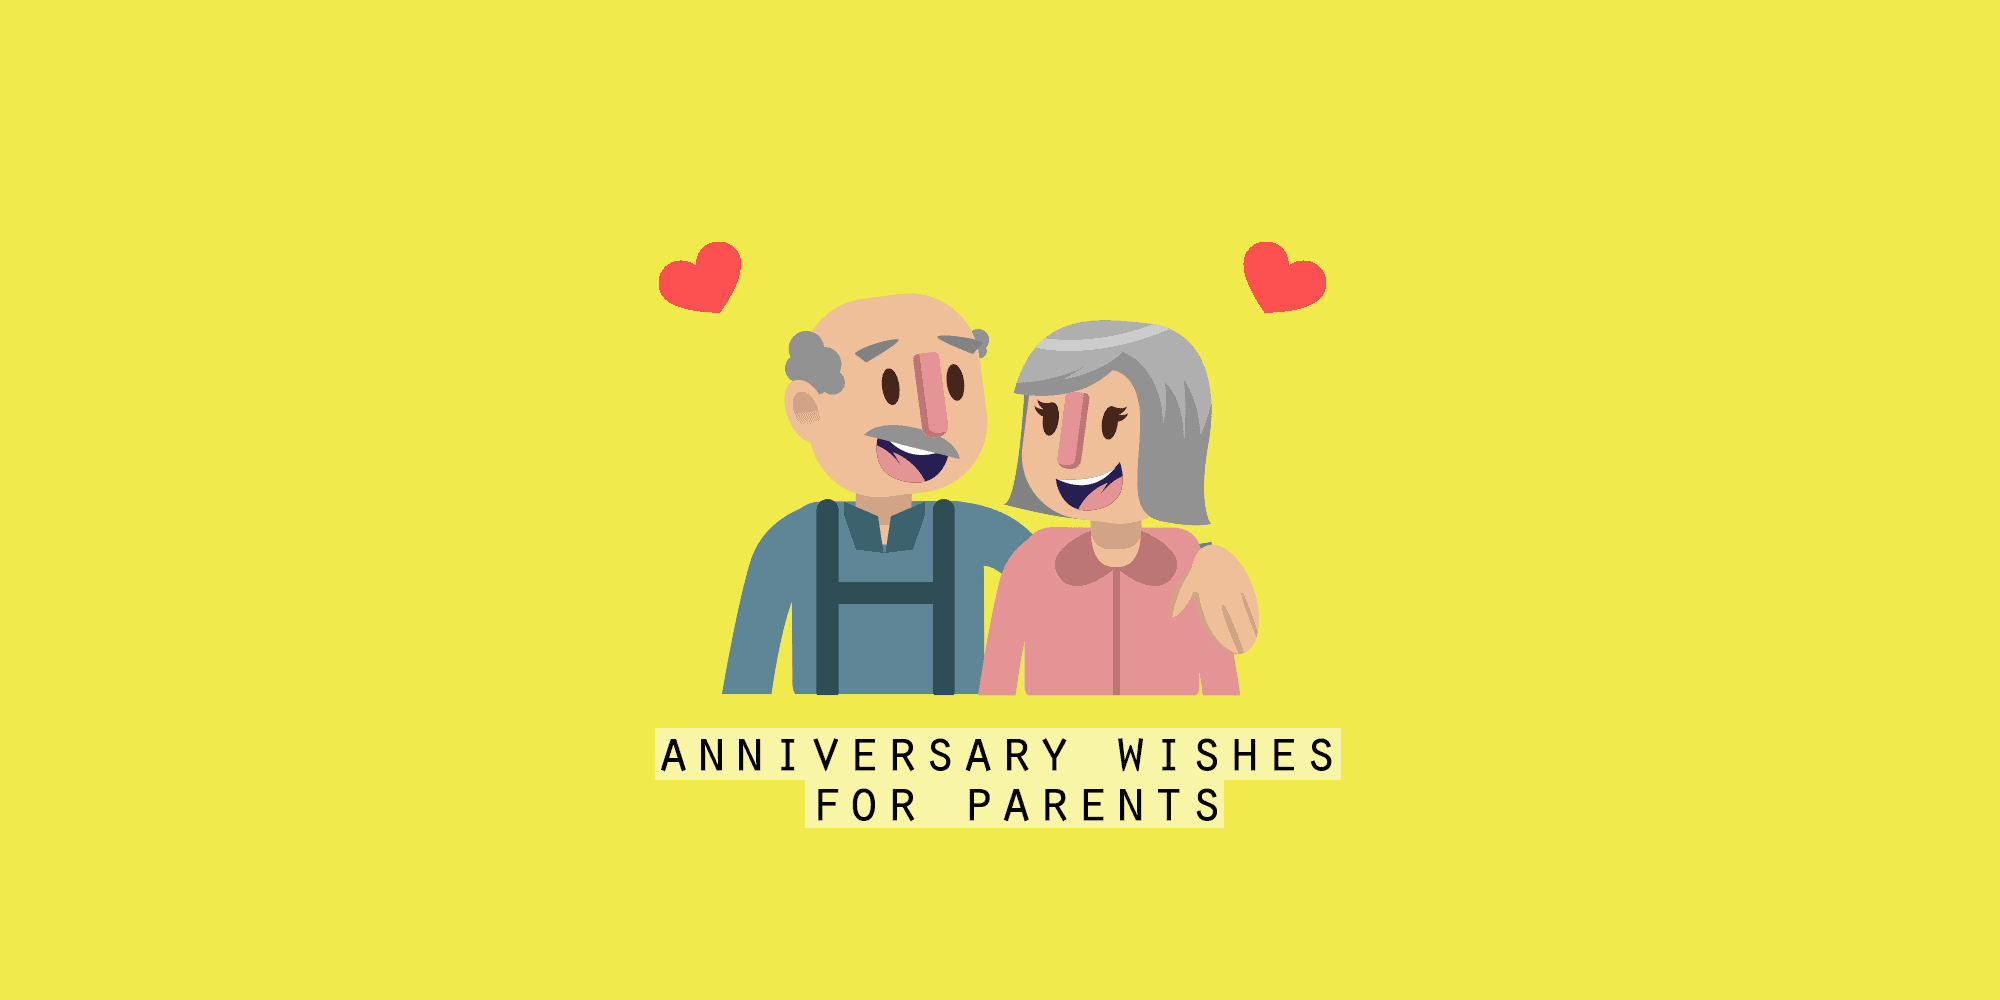 66 Sweetest Happy Anniversary Wishes For Parents: Quotes, Messages and Poems